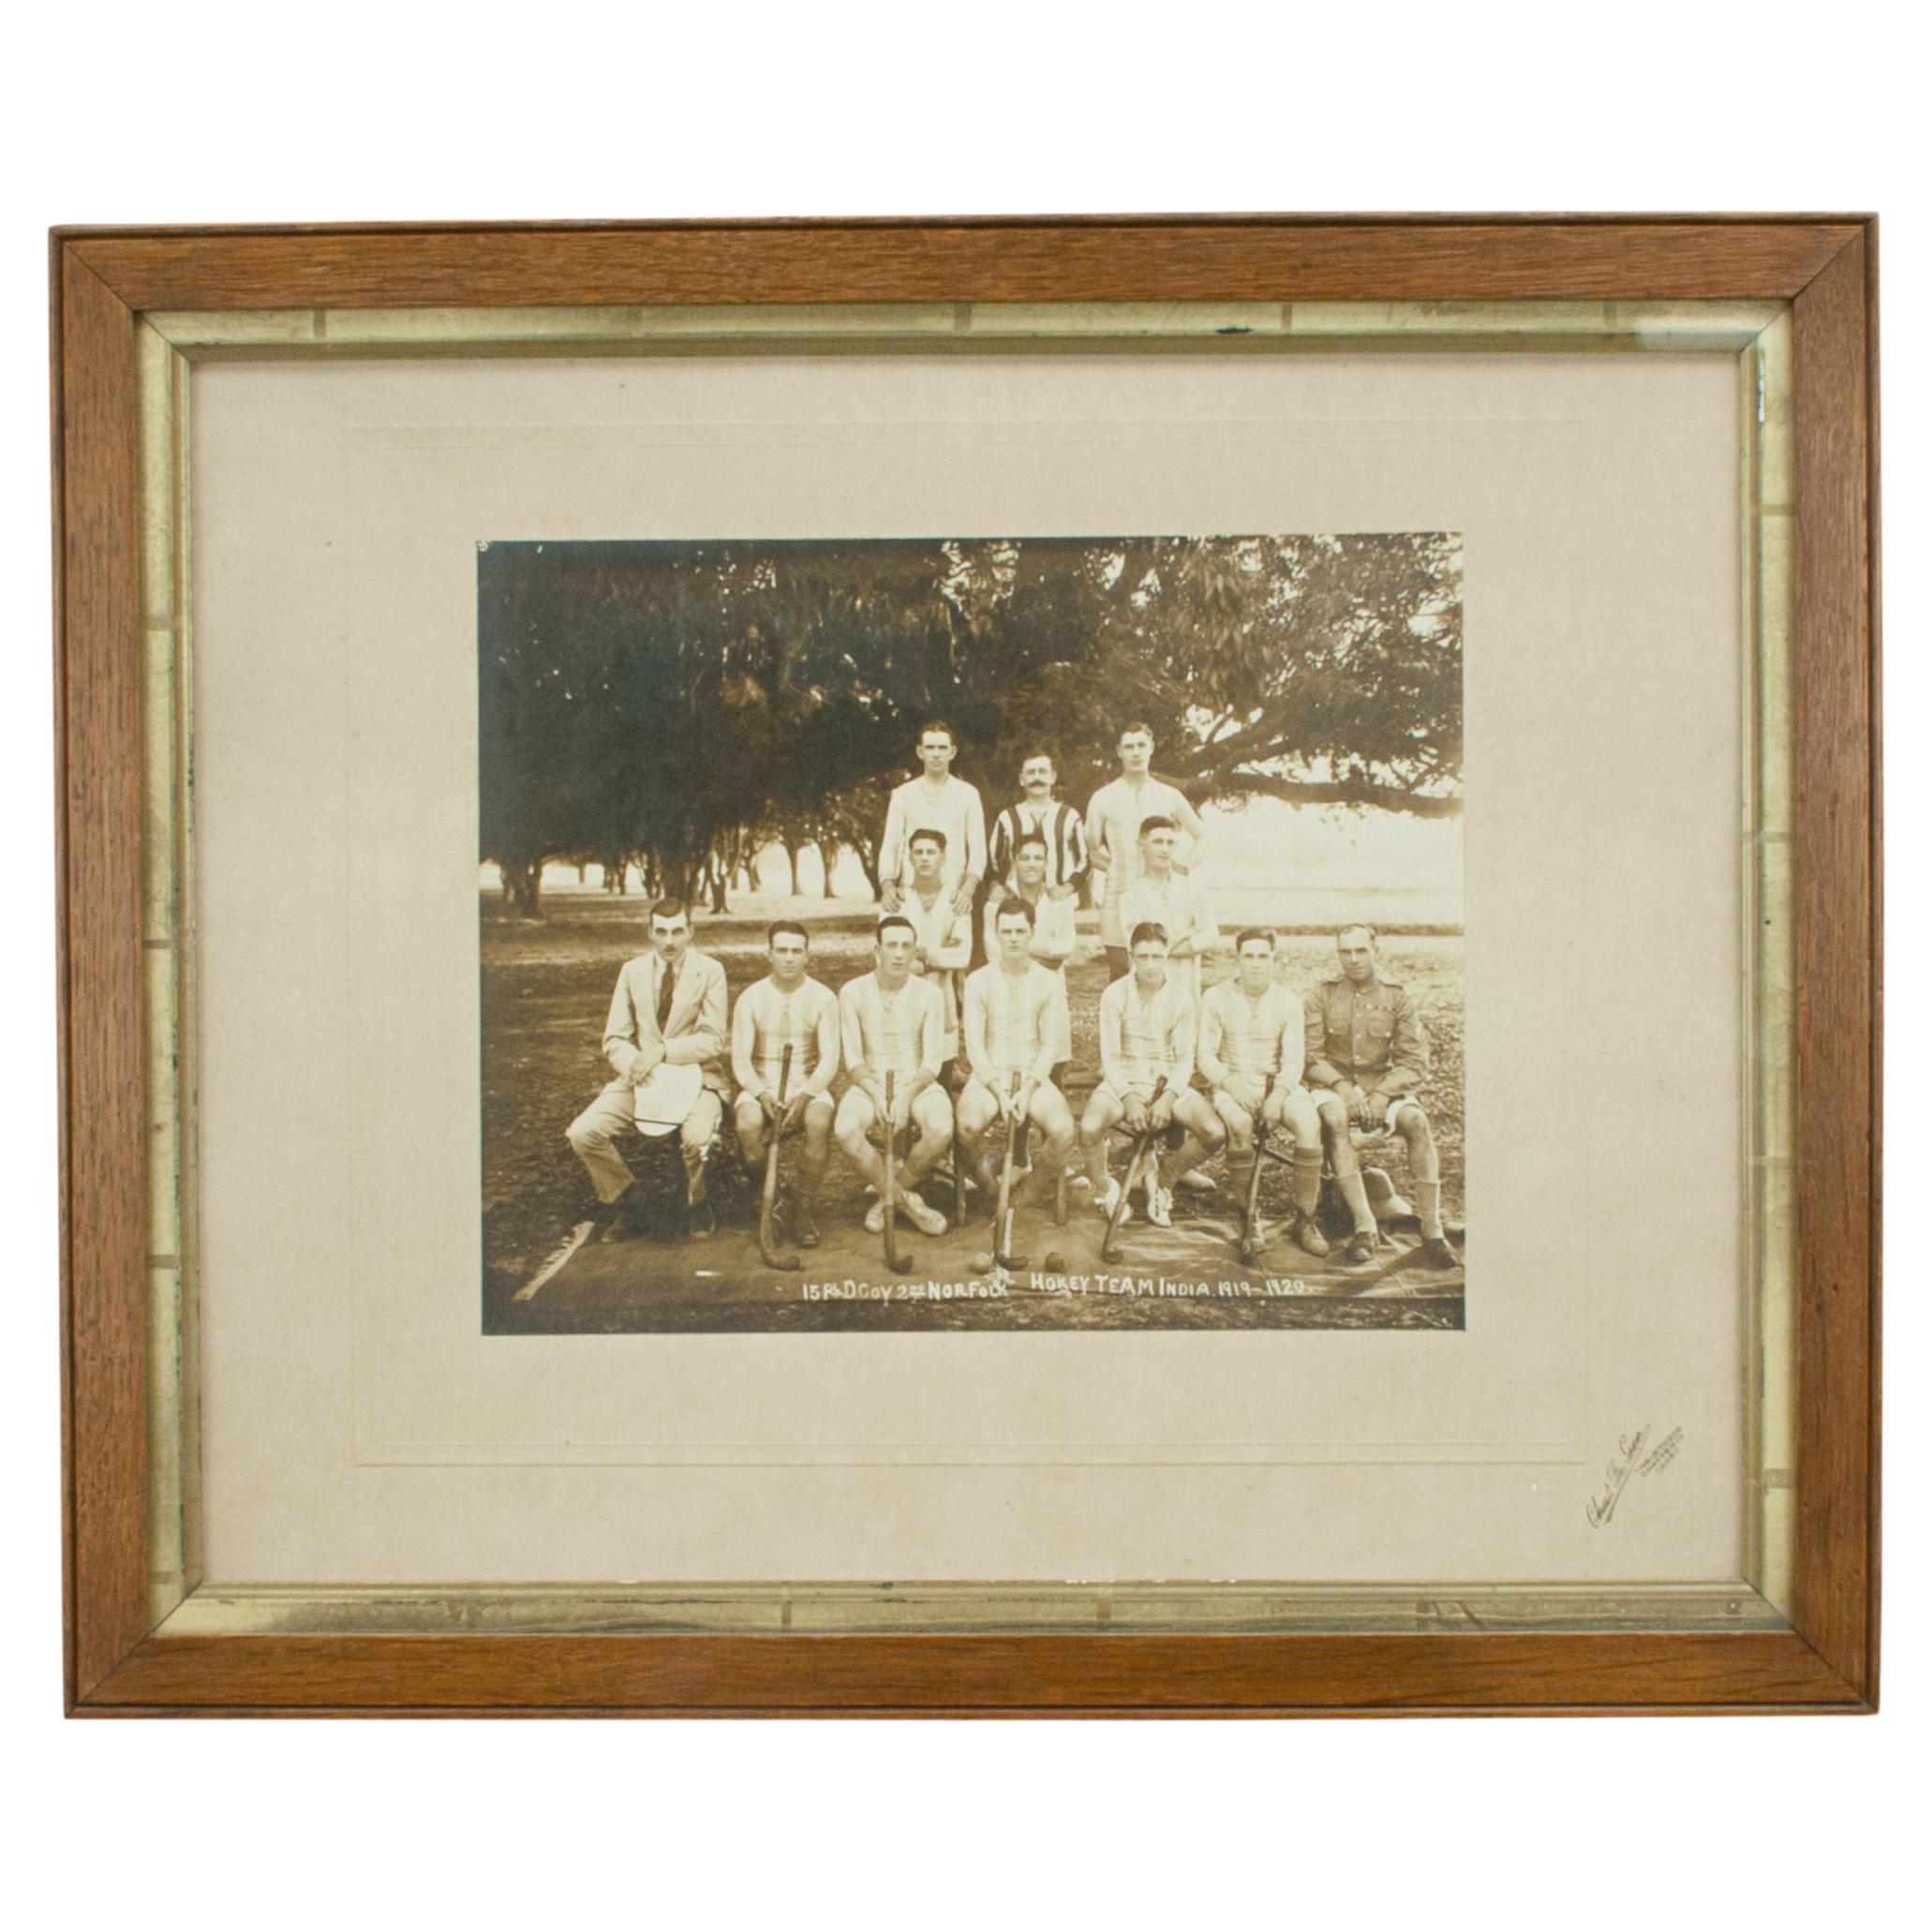 Military Hockey Team Photograph in India. For Sale